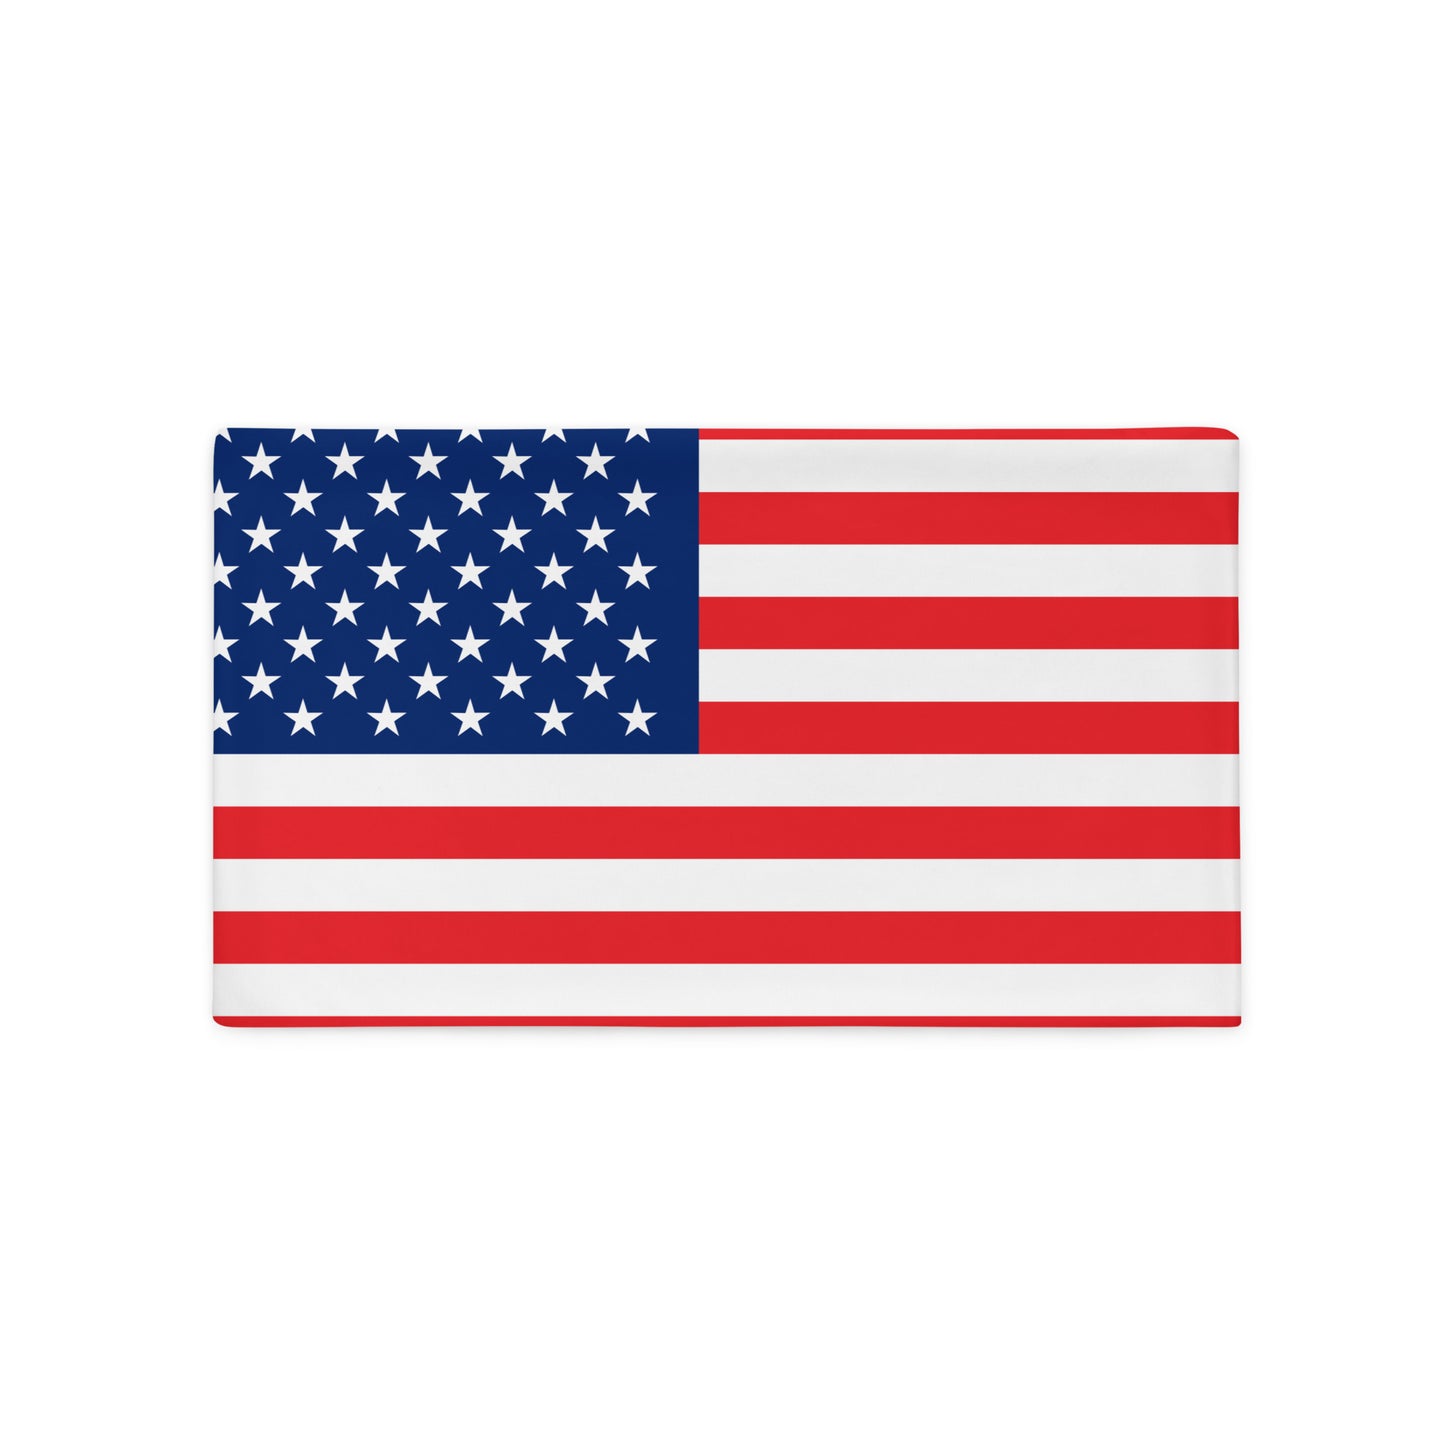 U.S.A Flag - Sustainably Made Pillows